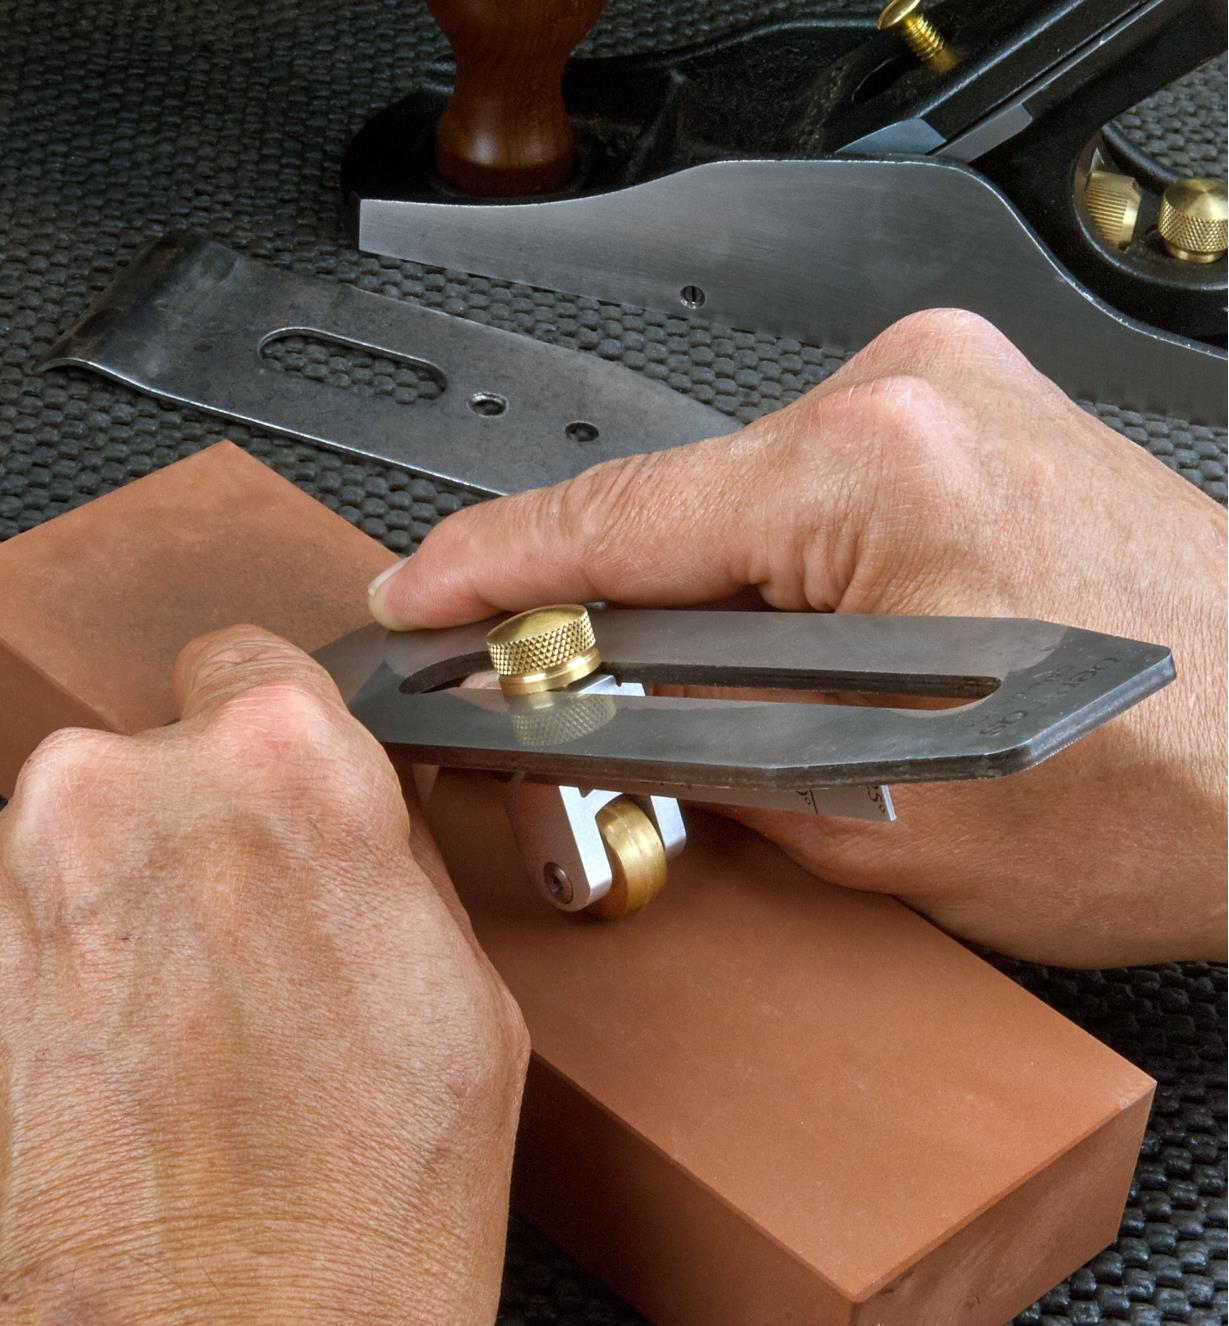 A woodworker uses a Lee Valley replica honing guide to sharpen a plane blade on a sharpening stone